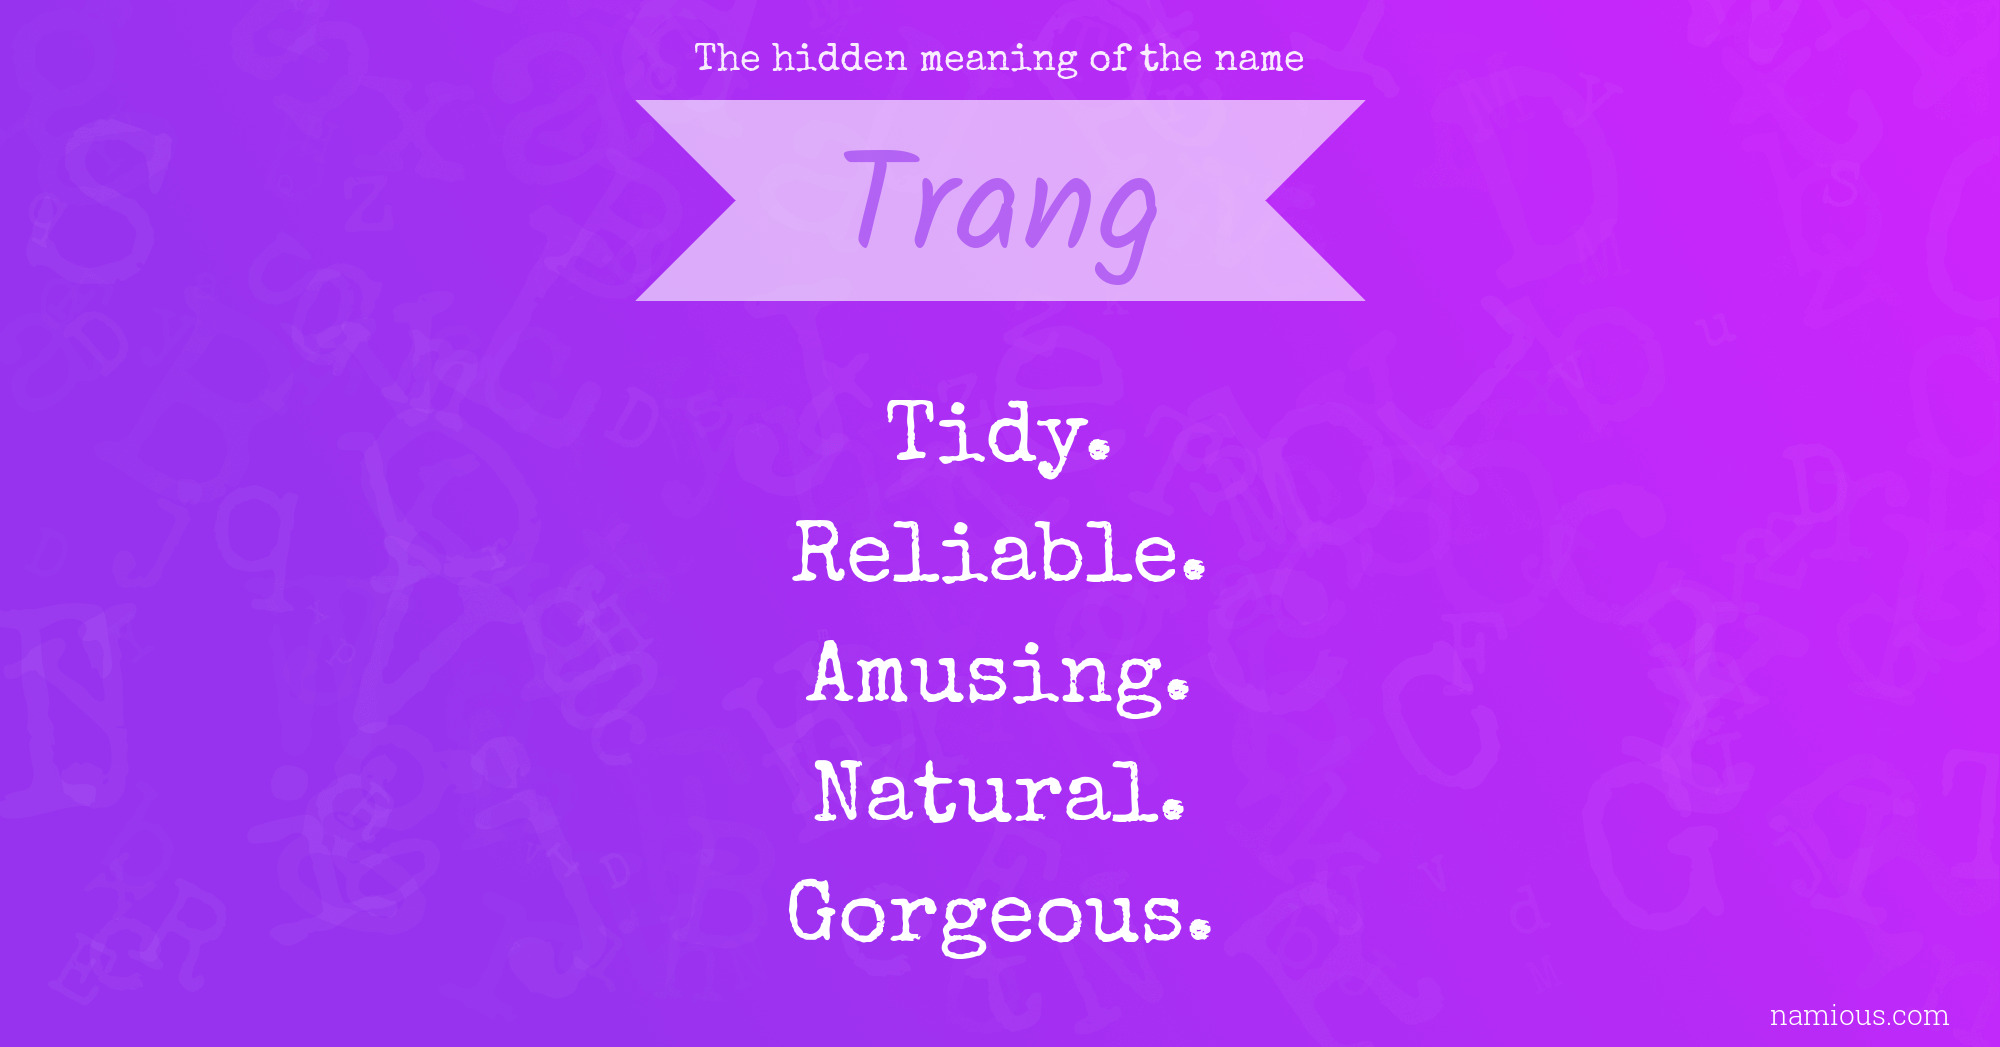 The hidden meaning of the name Trang